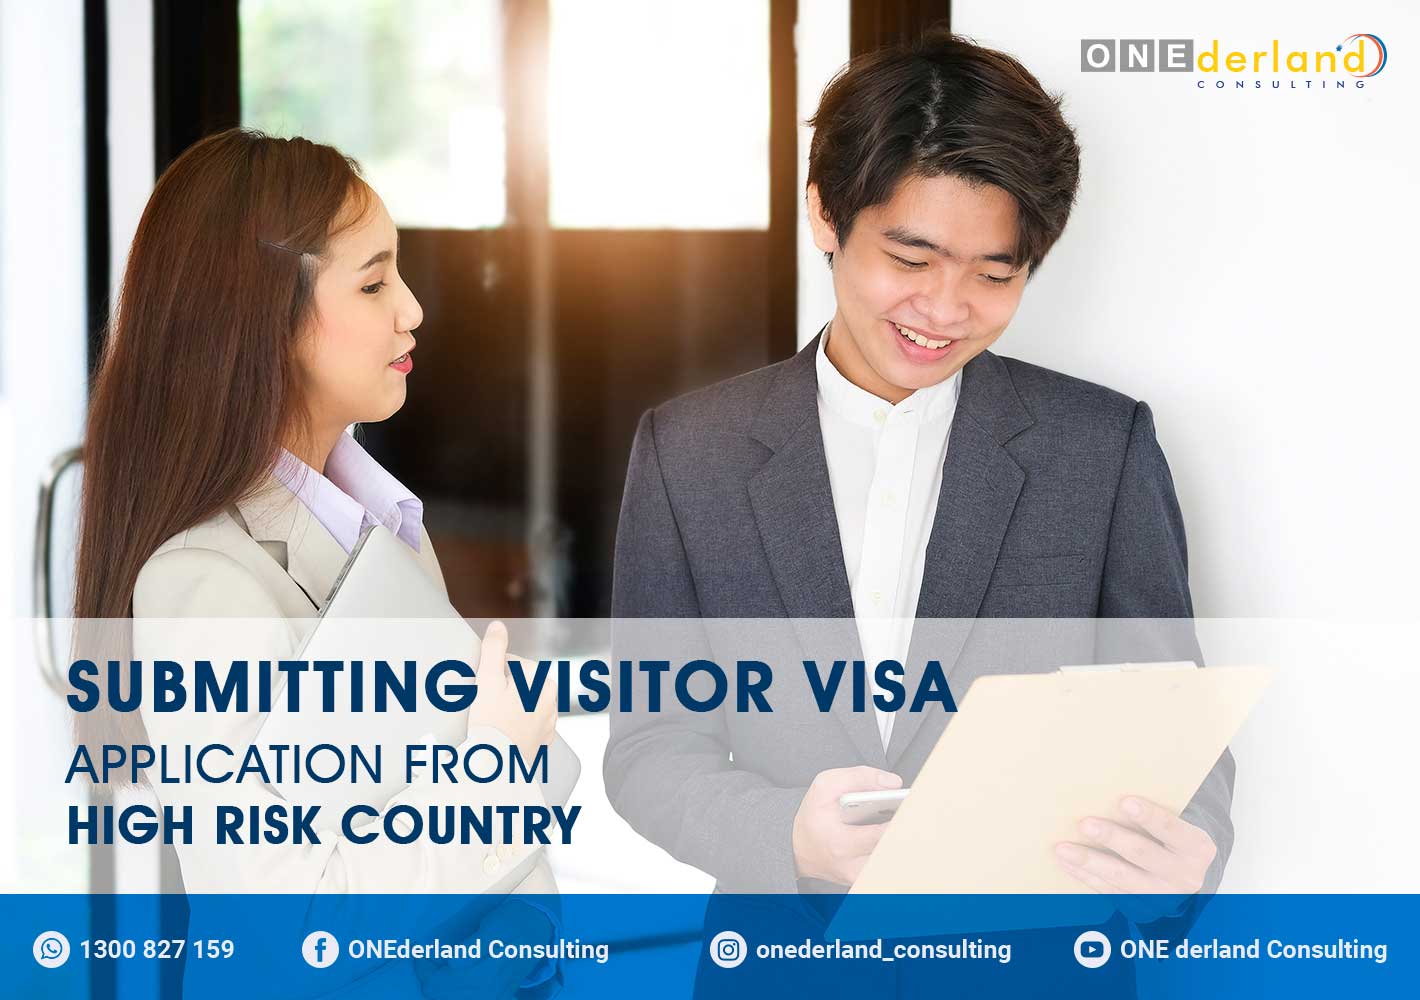 Submitting a Visitor Visa Application From High-Risk Country